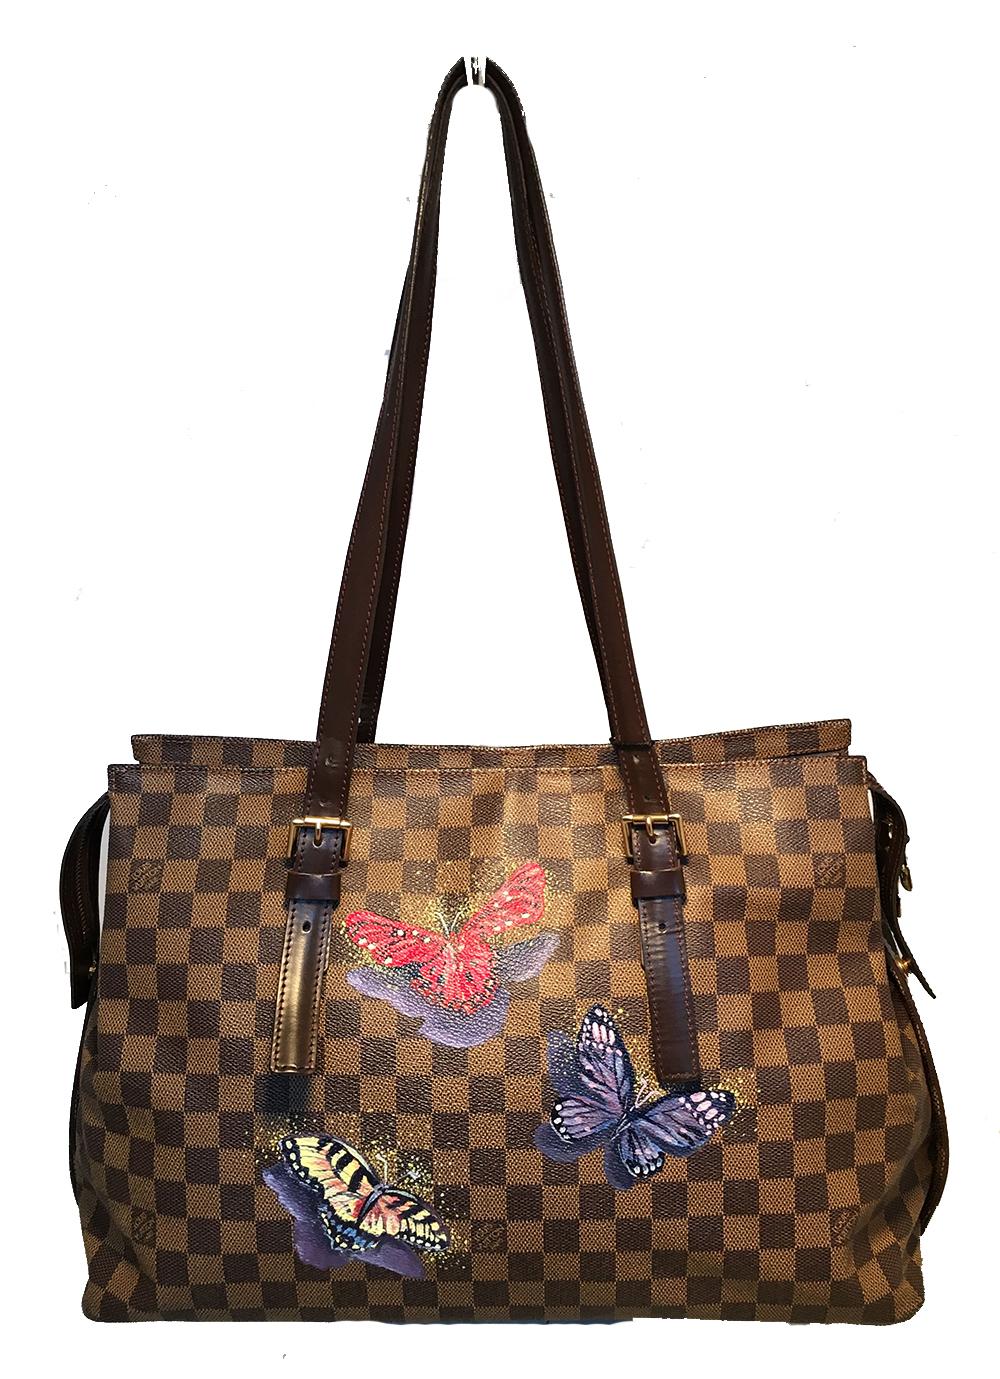 Louis Vuitton Damier Ebene Customized Hand Painted Butterfly Chelsea Shoulder Bag Tote in excellent condition. Signature brown square checker print damier ebene canvas trimmed with dark brown leather and gold hardware. Customized, Hand painted